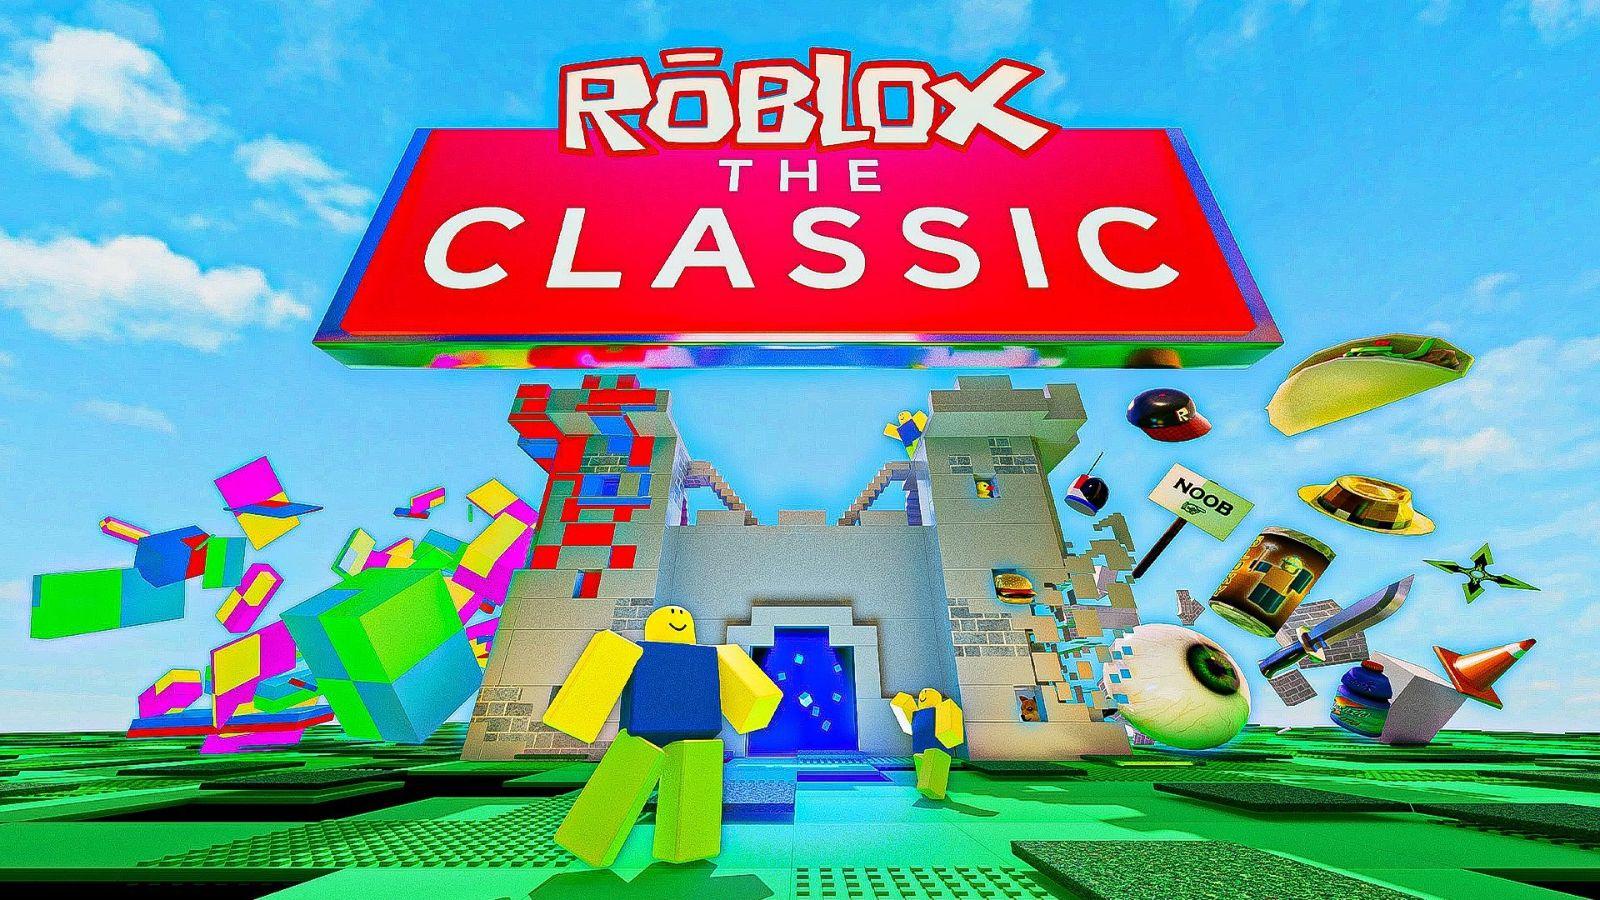 All Games in Roblox The Classic event